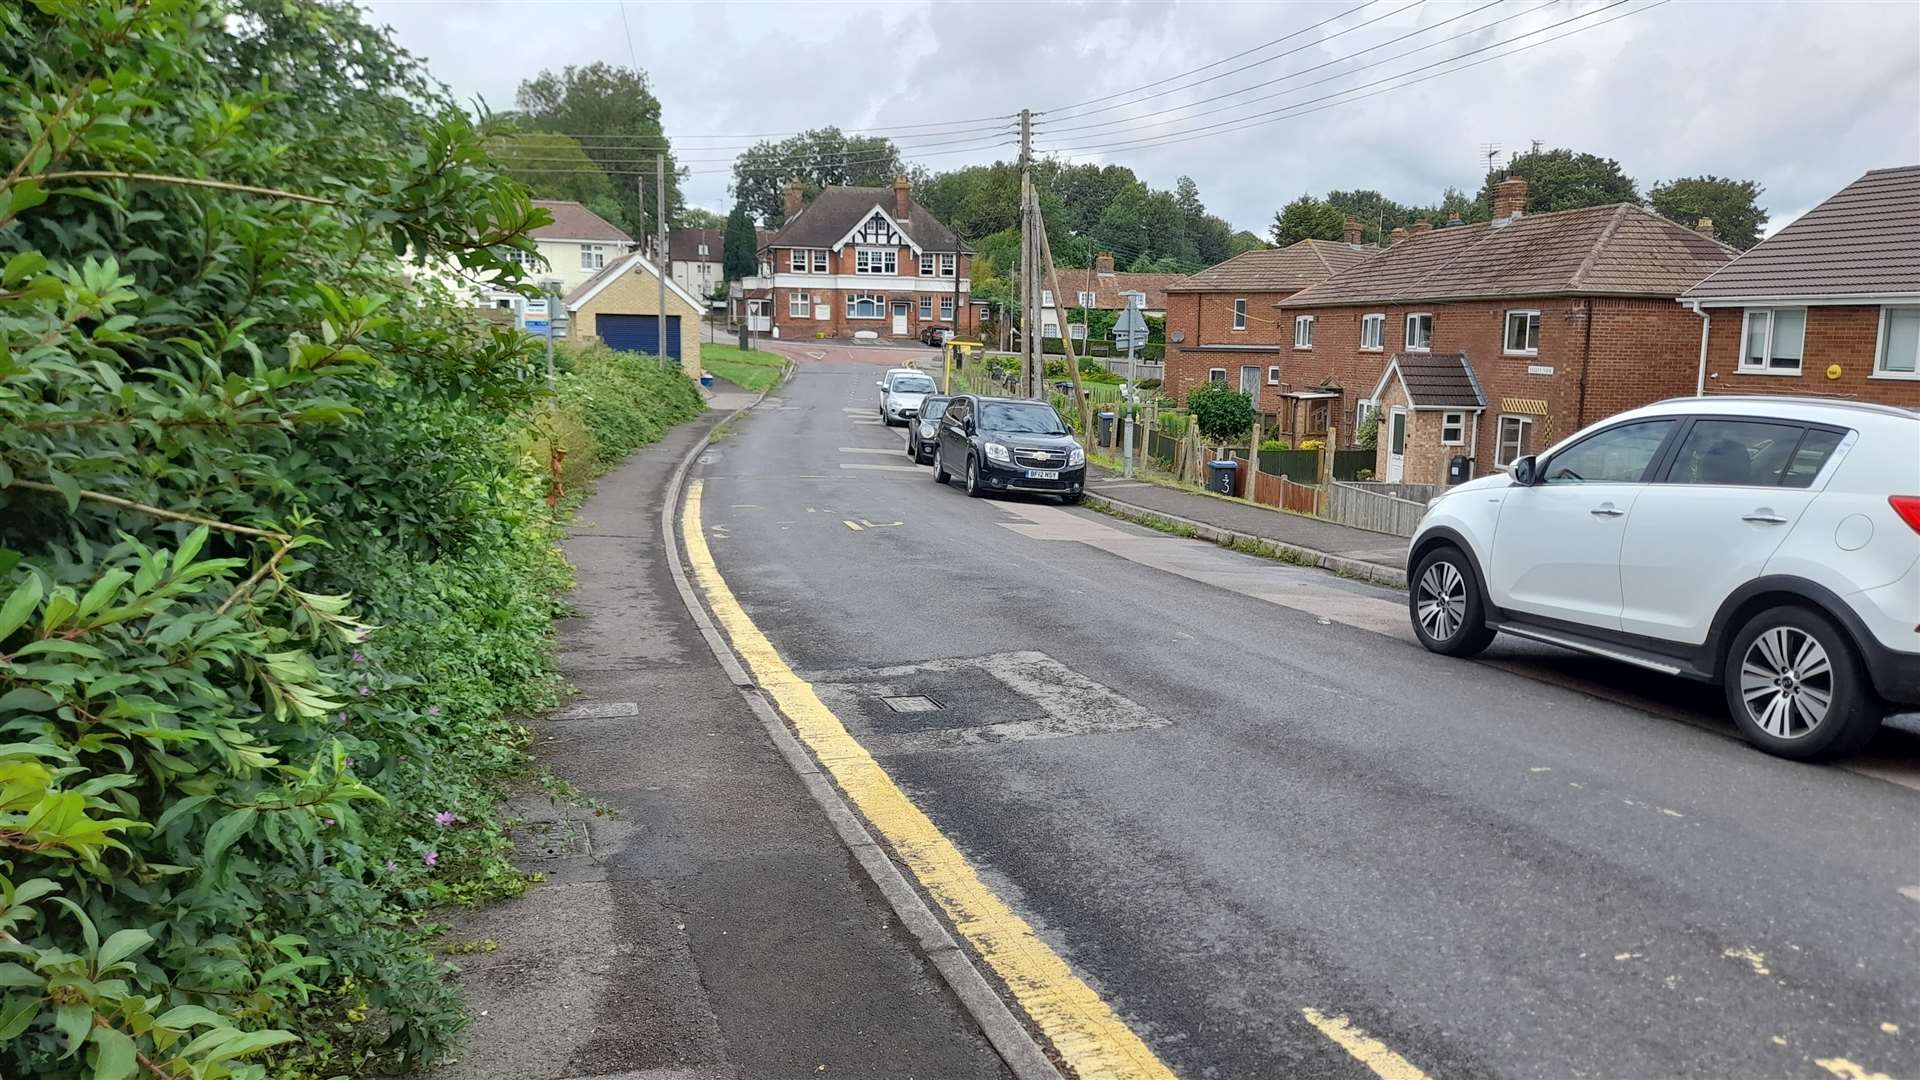 Residents fear Shooters Hill - already restricted by parked cars - could become even more dangerous